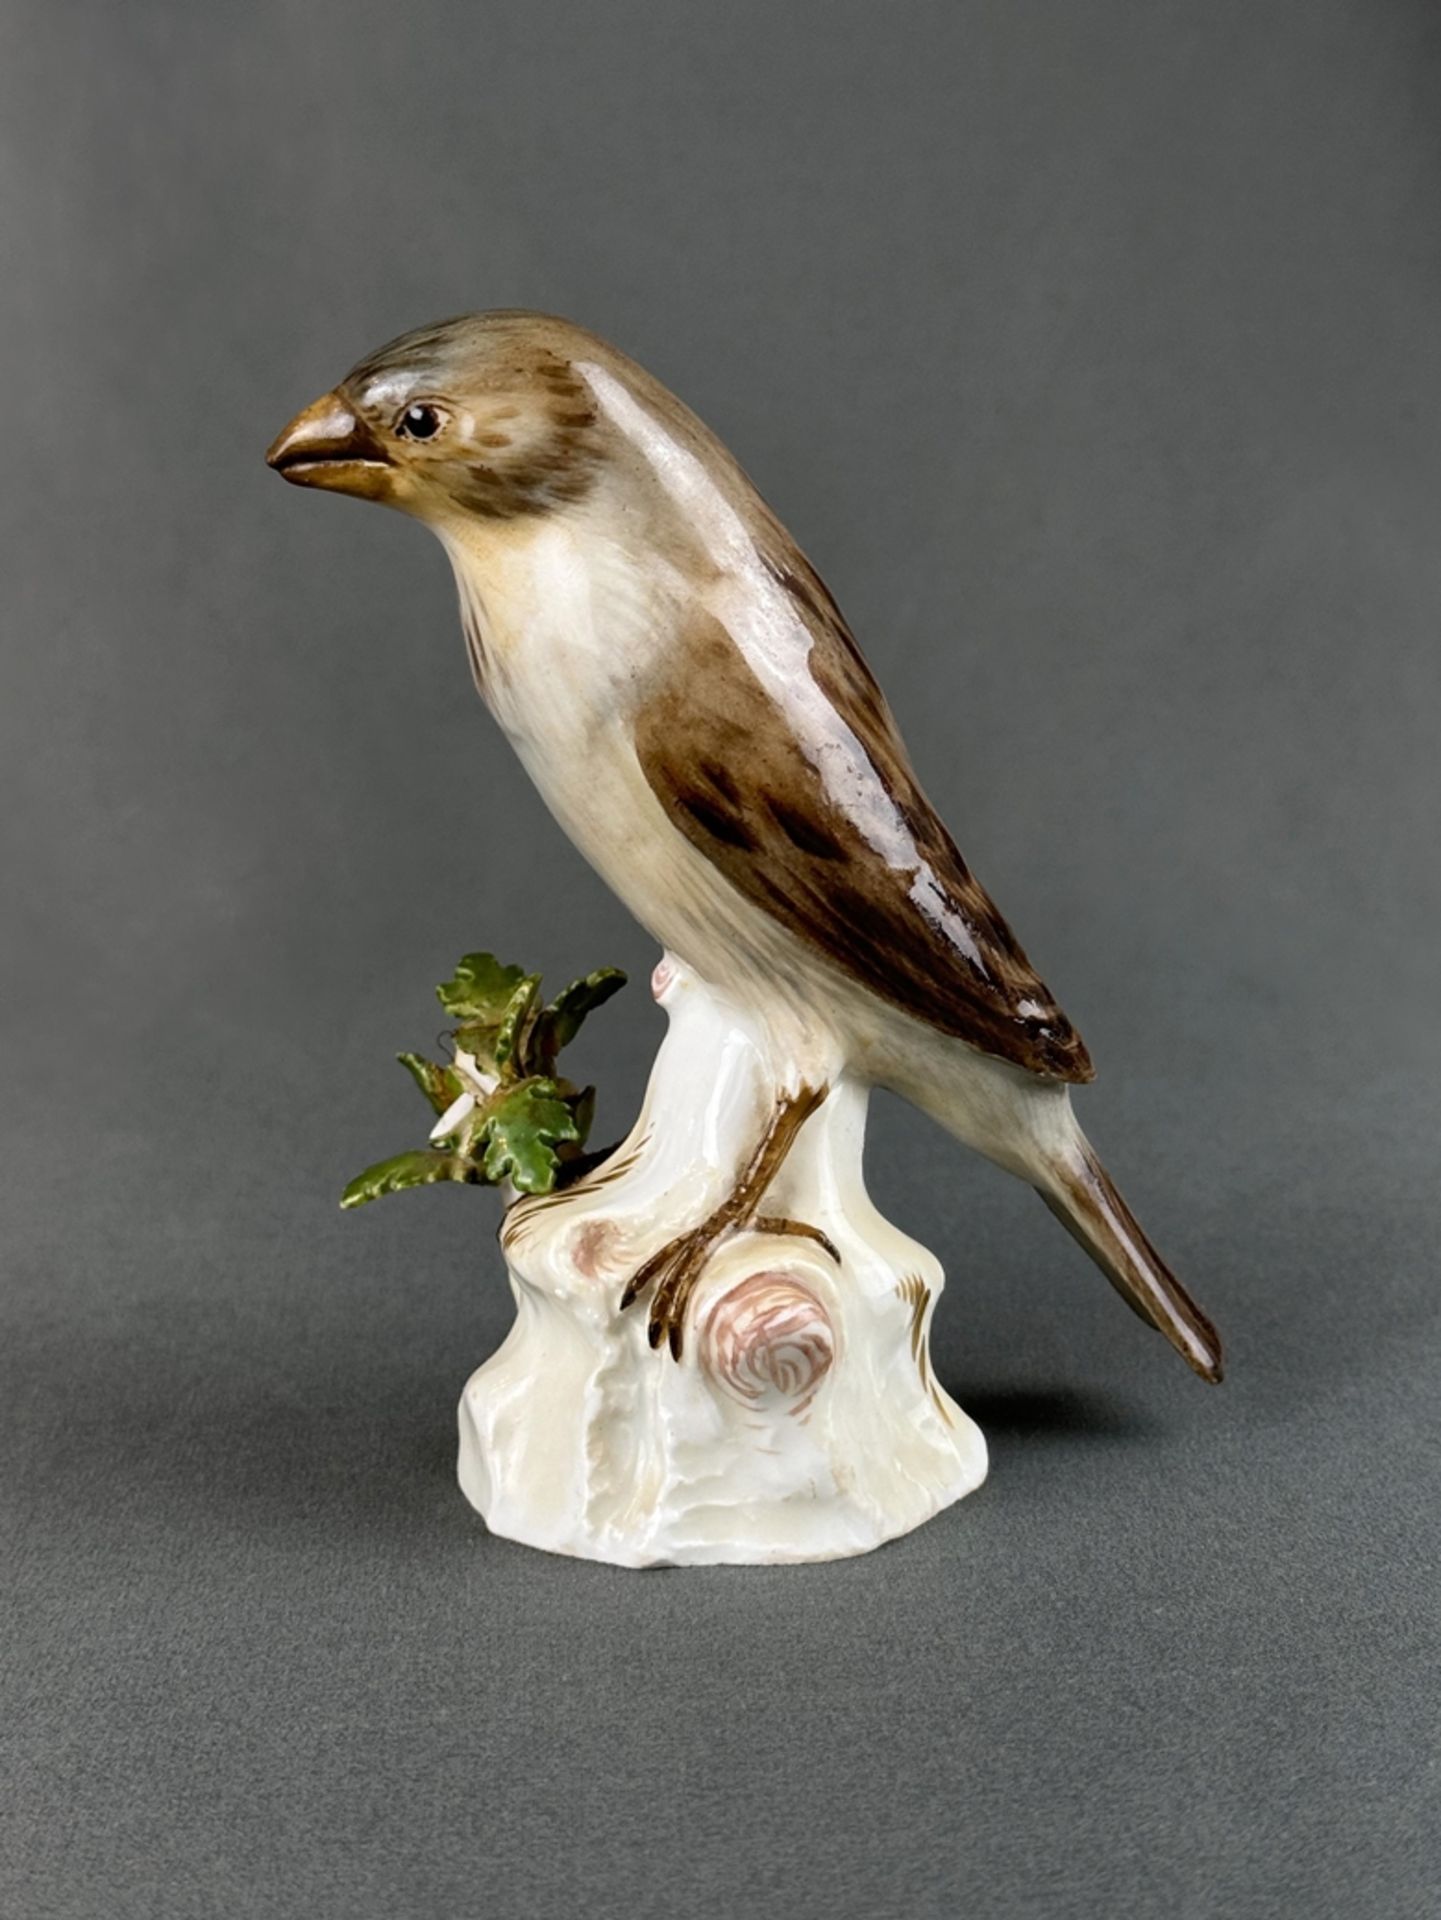 Porcelain figurine "Sparrow" Meissen sword mark, sparrow sitting on a branch base, with leaves, und